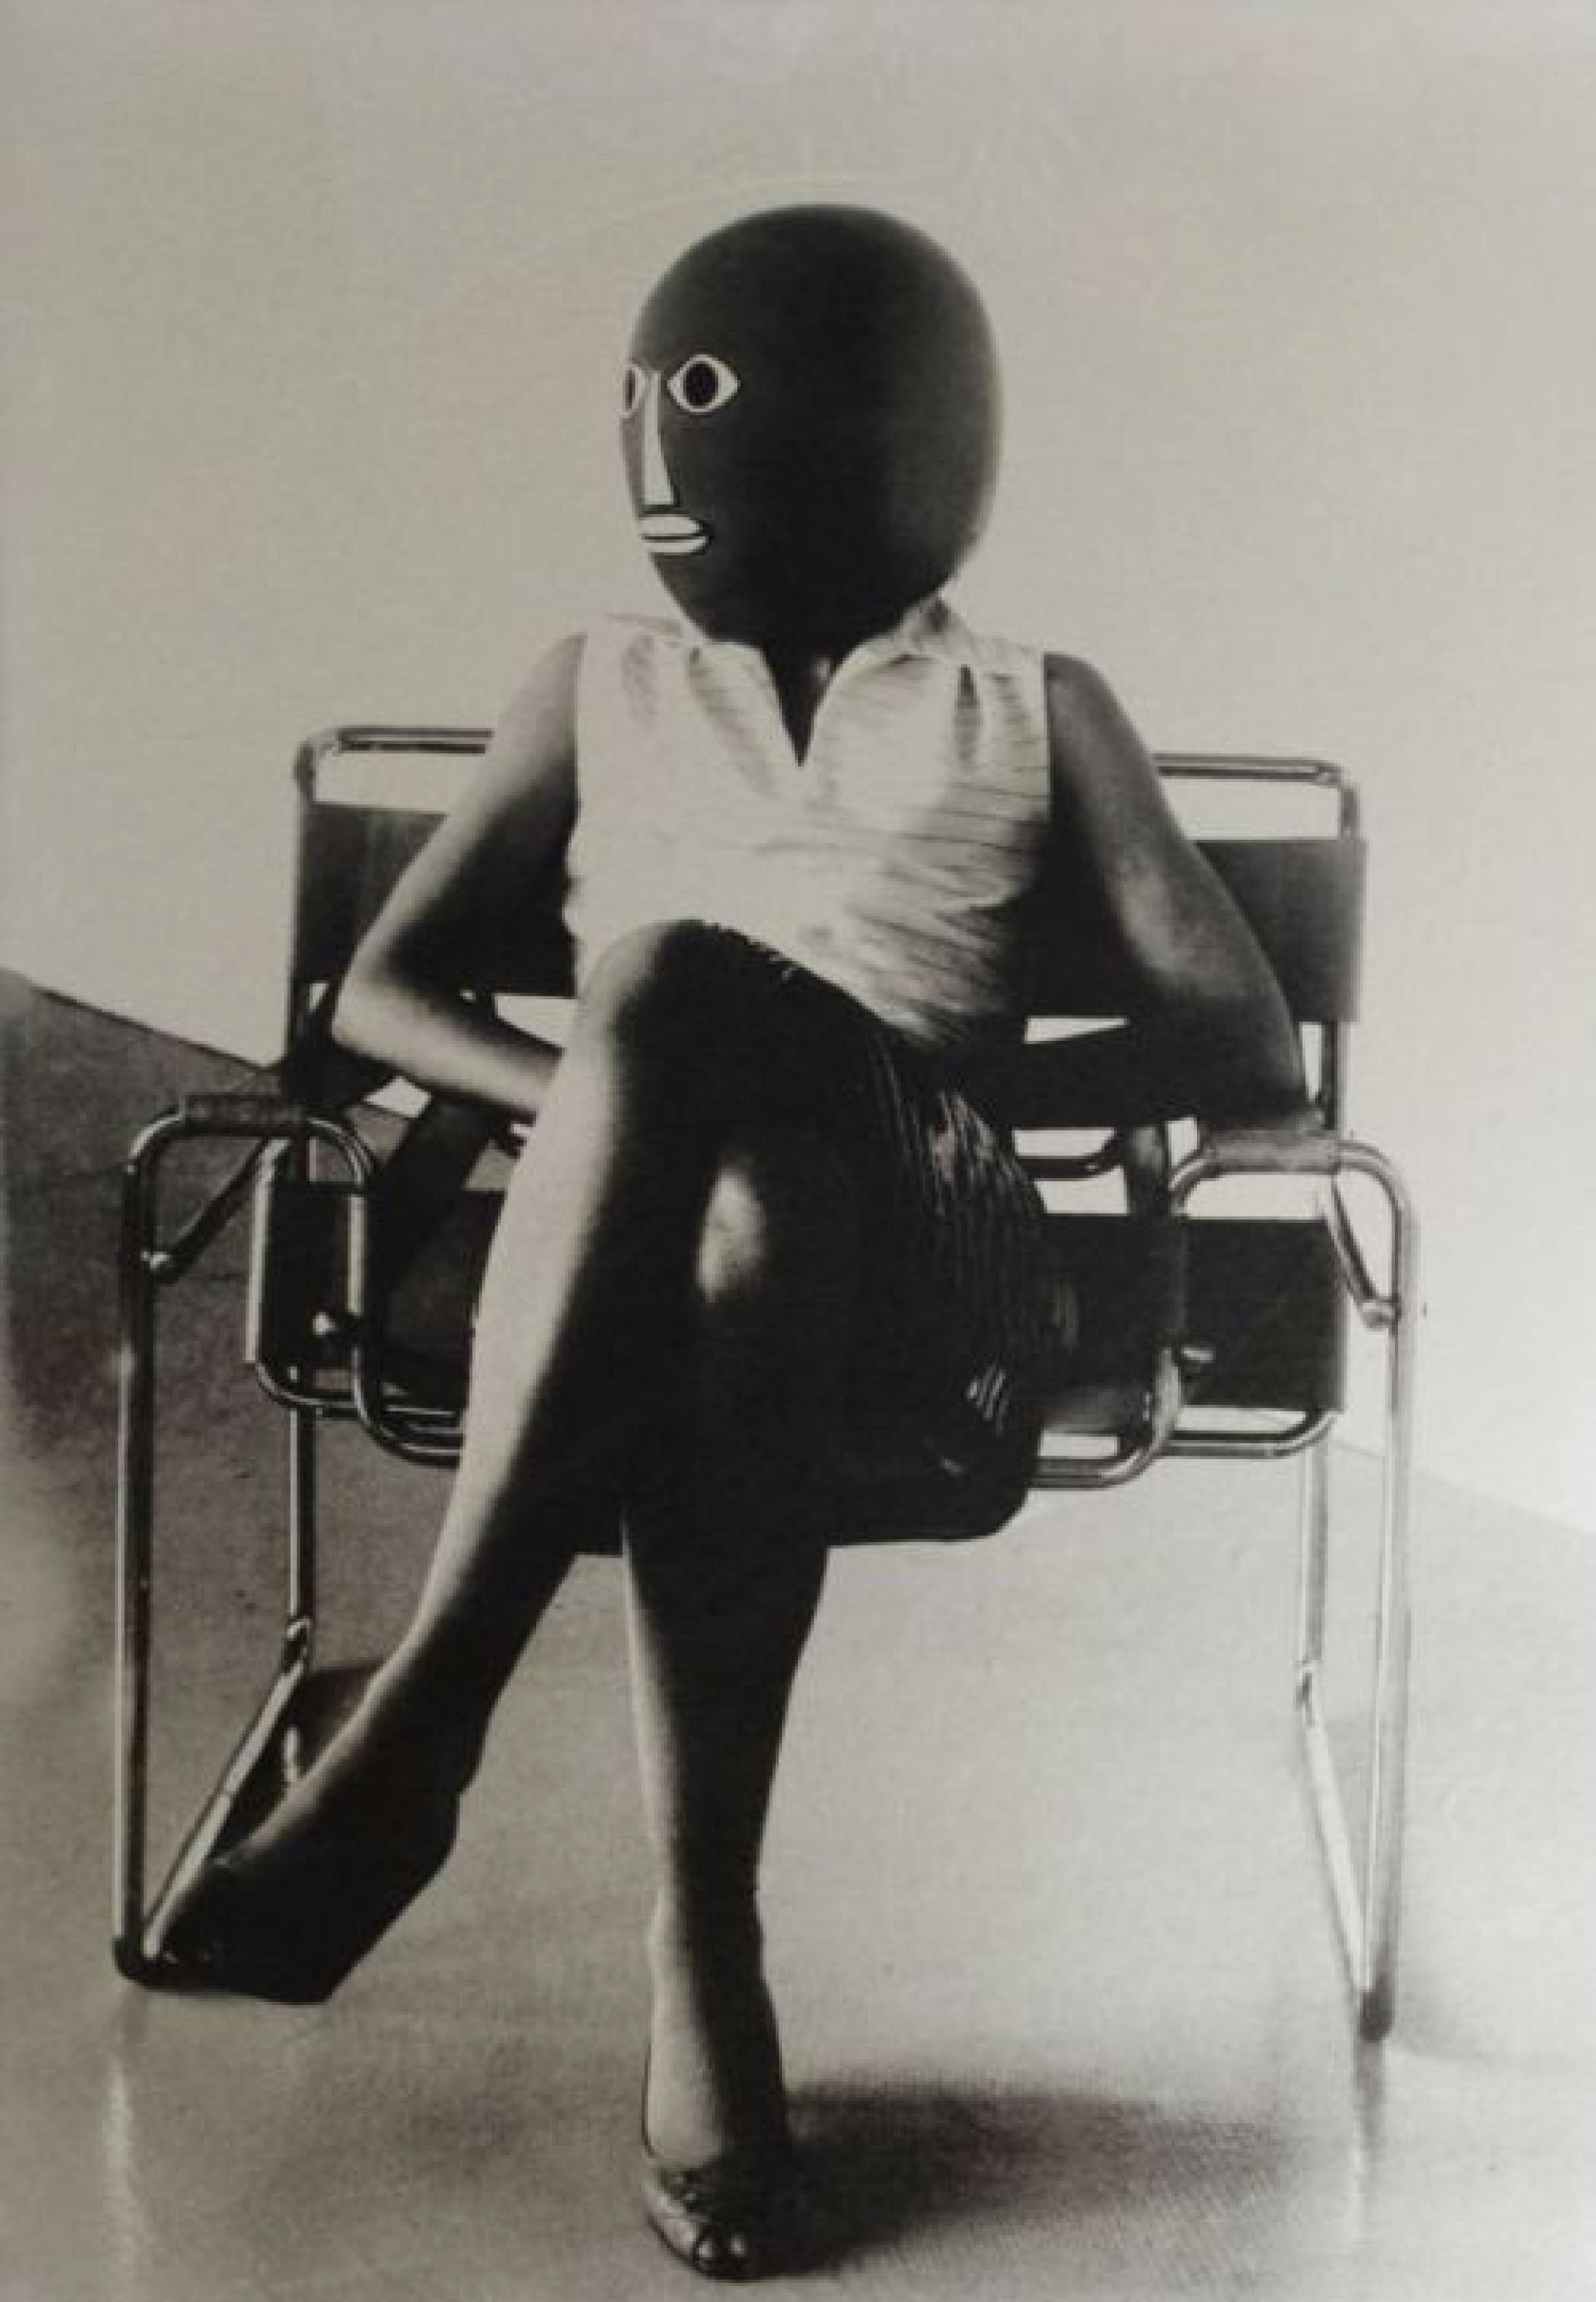 Unknown student in Marcel Breuer Chair. | Photo by Ursula Mayer